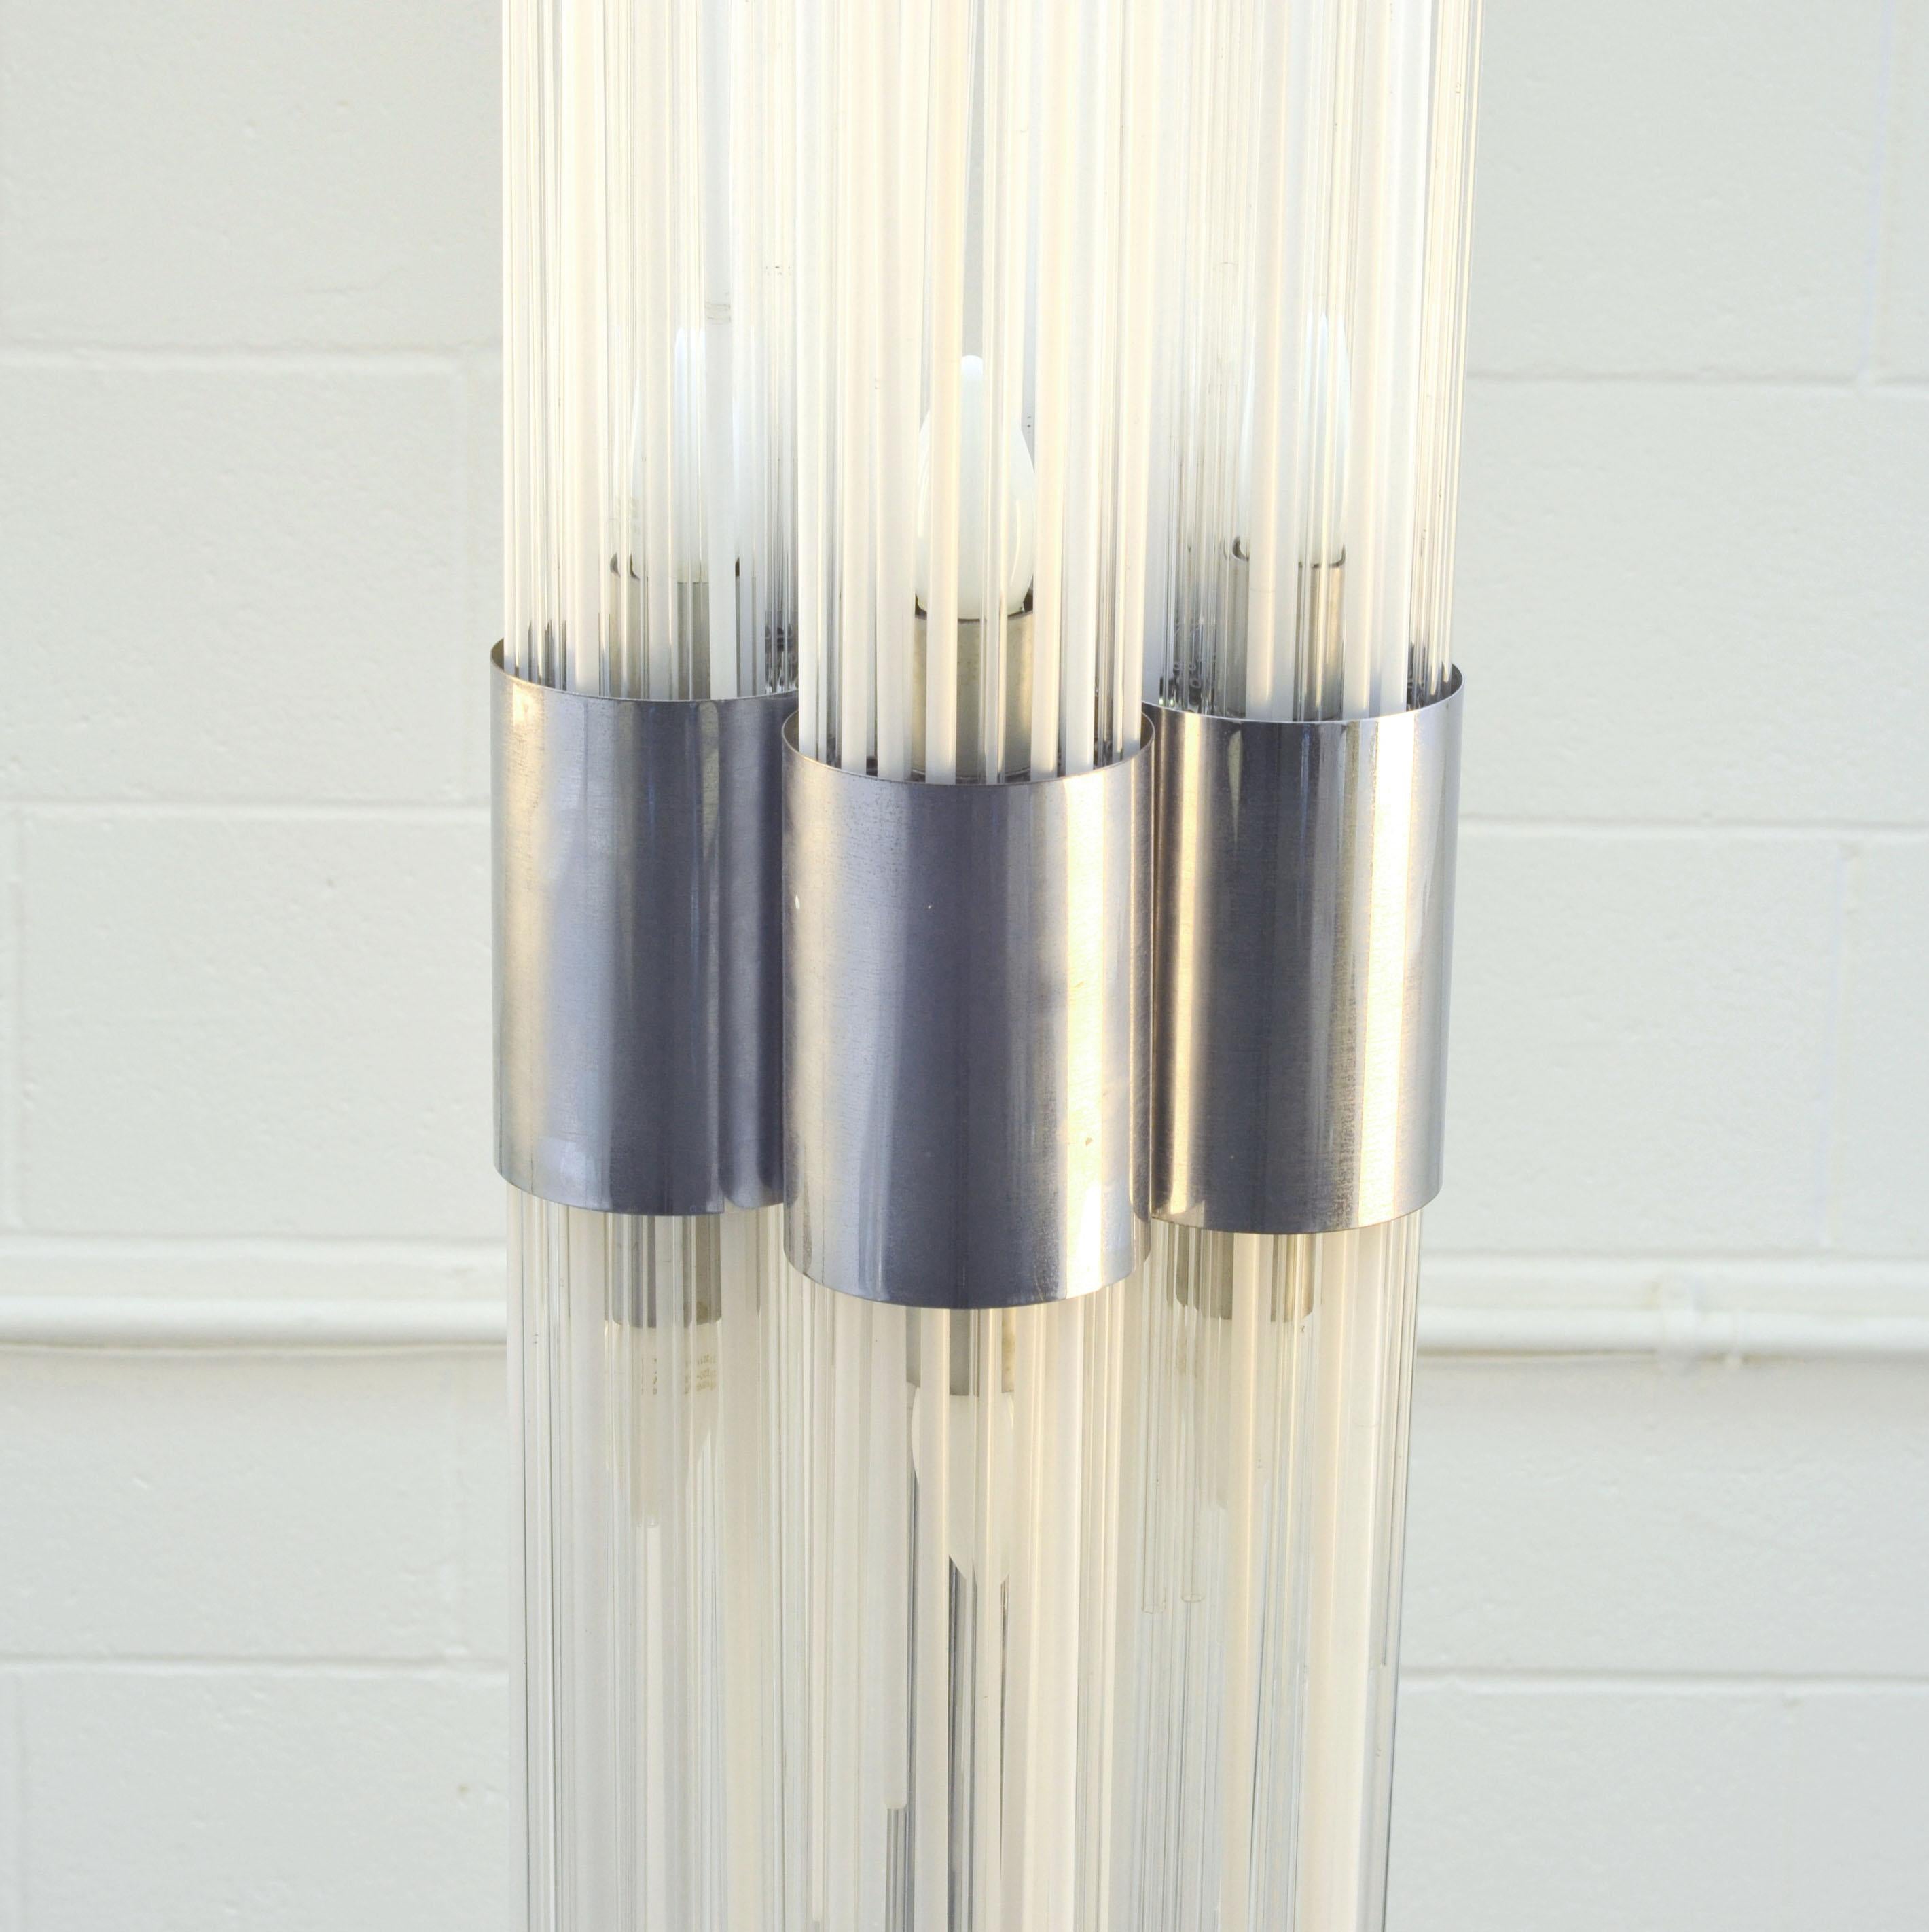 Sculptural Art Floor Lamp in Reed Glass Rods on Chrome Stand In Italy 1960's  For Sale 3